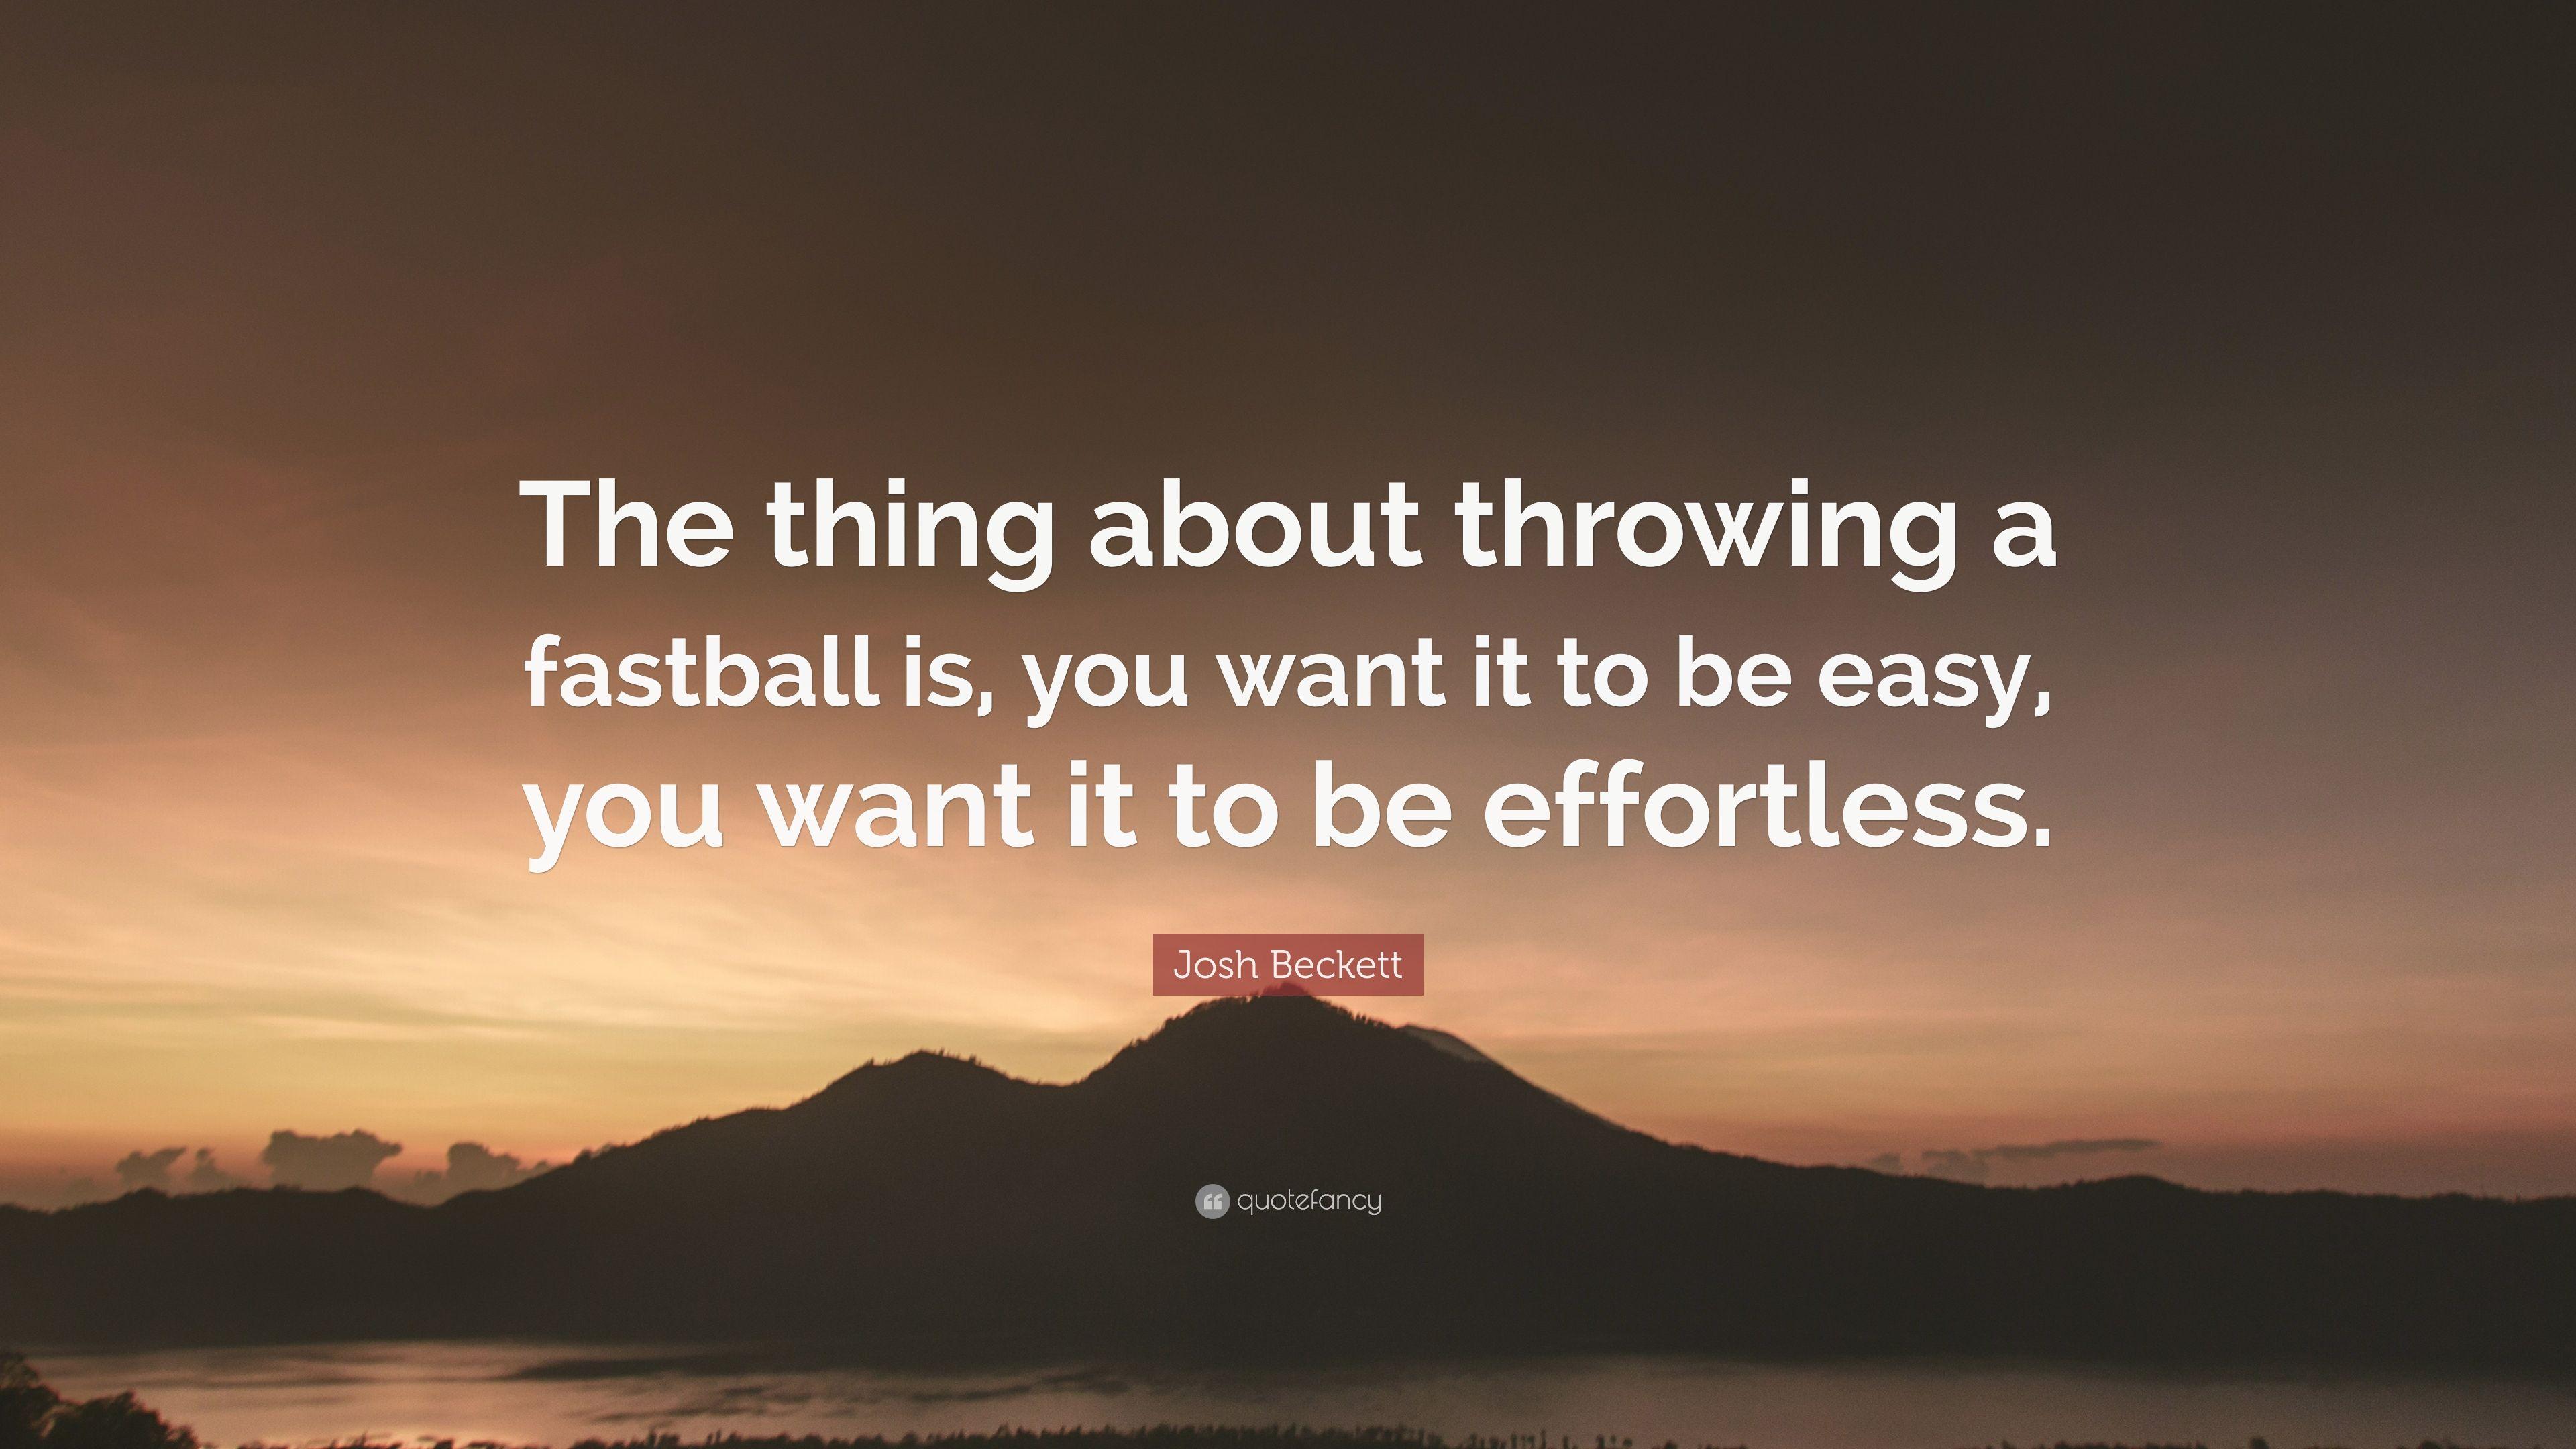 Josh Beckett Quote: “The thing about throwing a fastball is, you